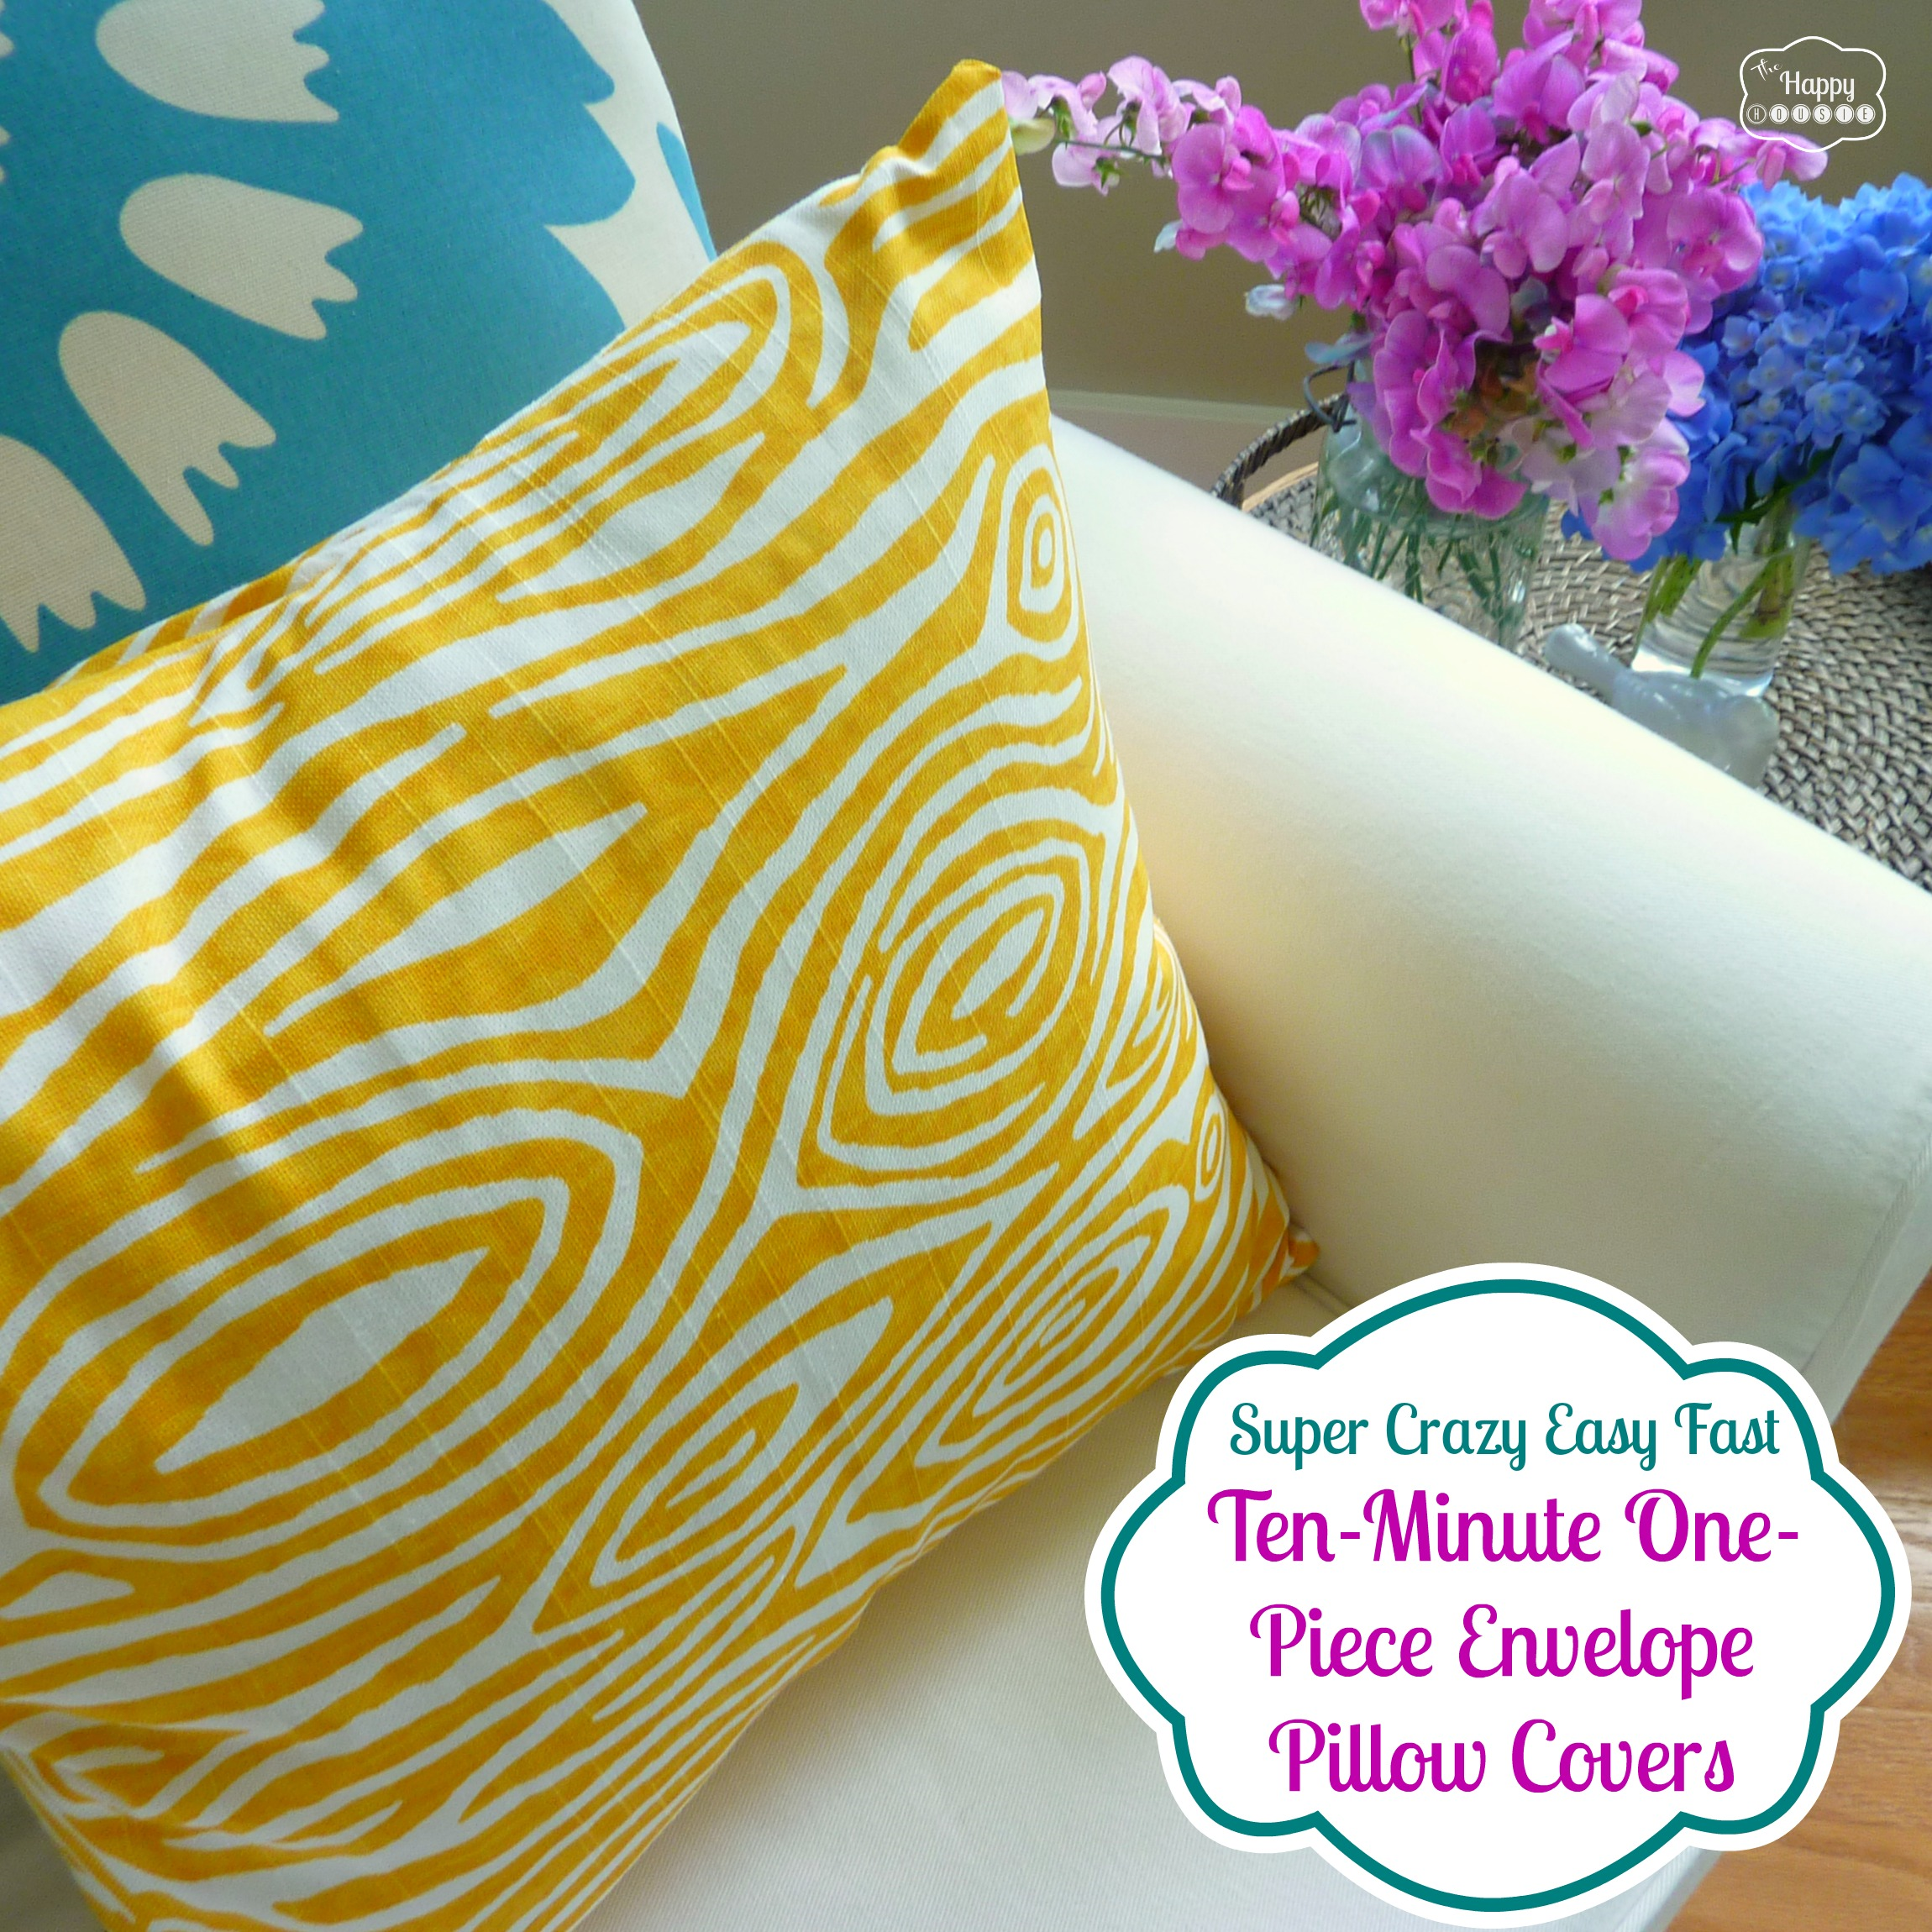 https://www.thehappyhousie.com/wp-content/uploads/2013/07/super-crazy-easy-fast-ten-minute-one-piece-envelope-pillow-covers-thumbnail-at-thehappyhousie.png